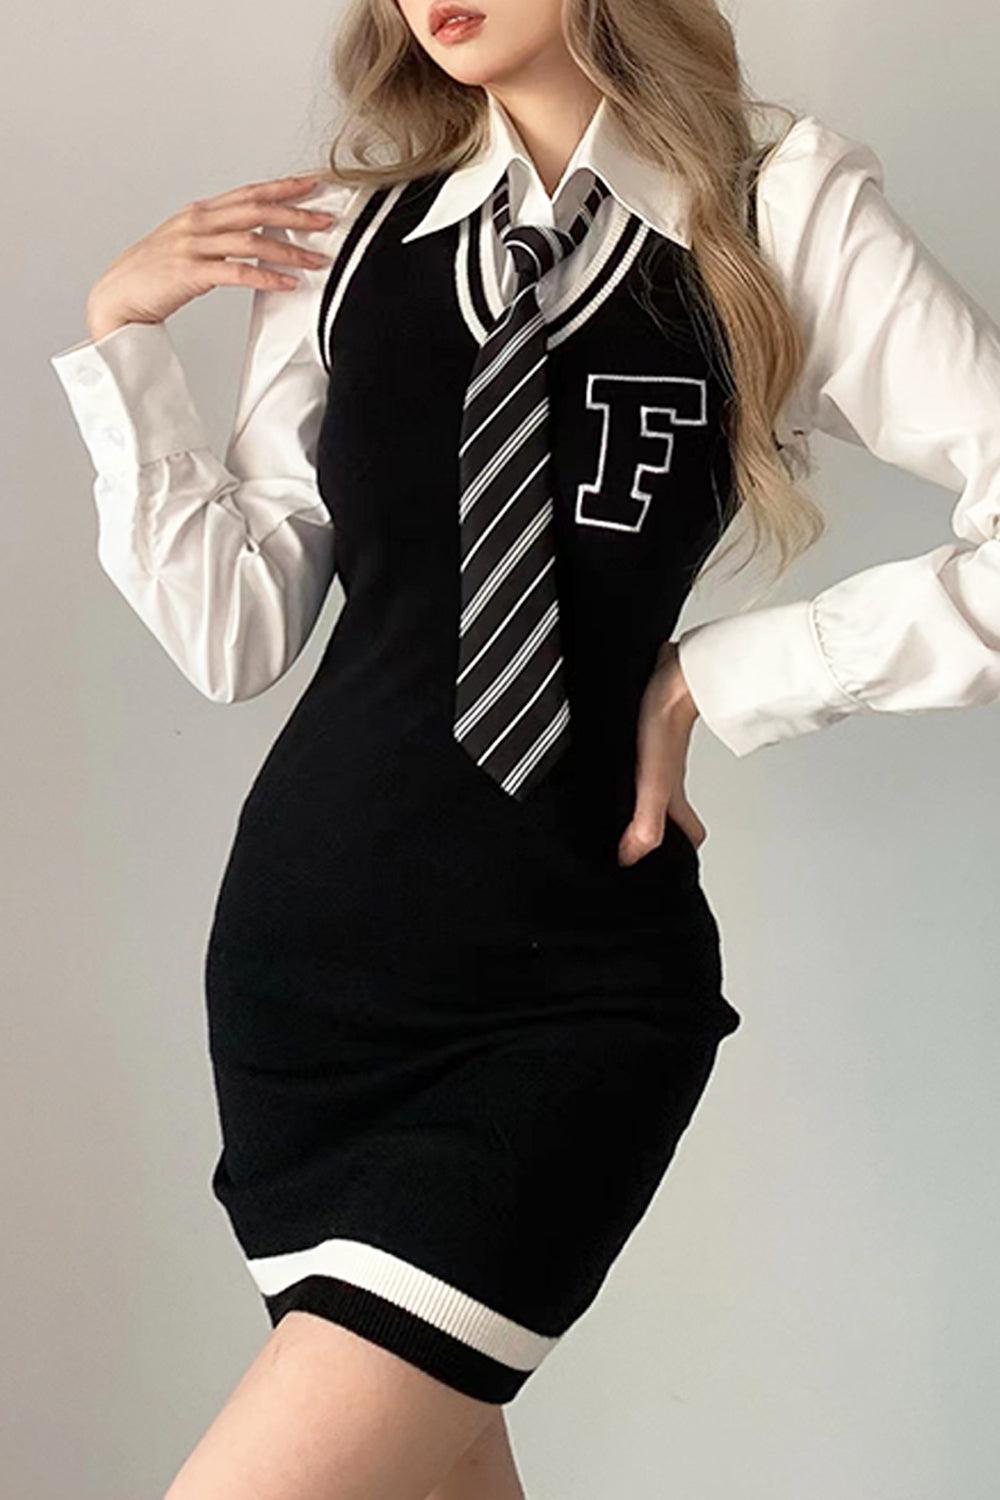 F Letter College Style Knit Dress - Aesthetic Clothes Shop